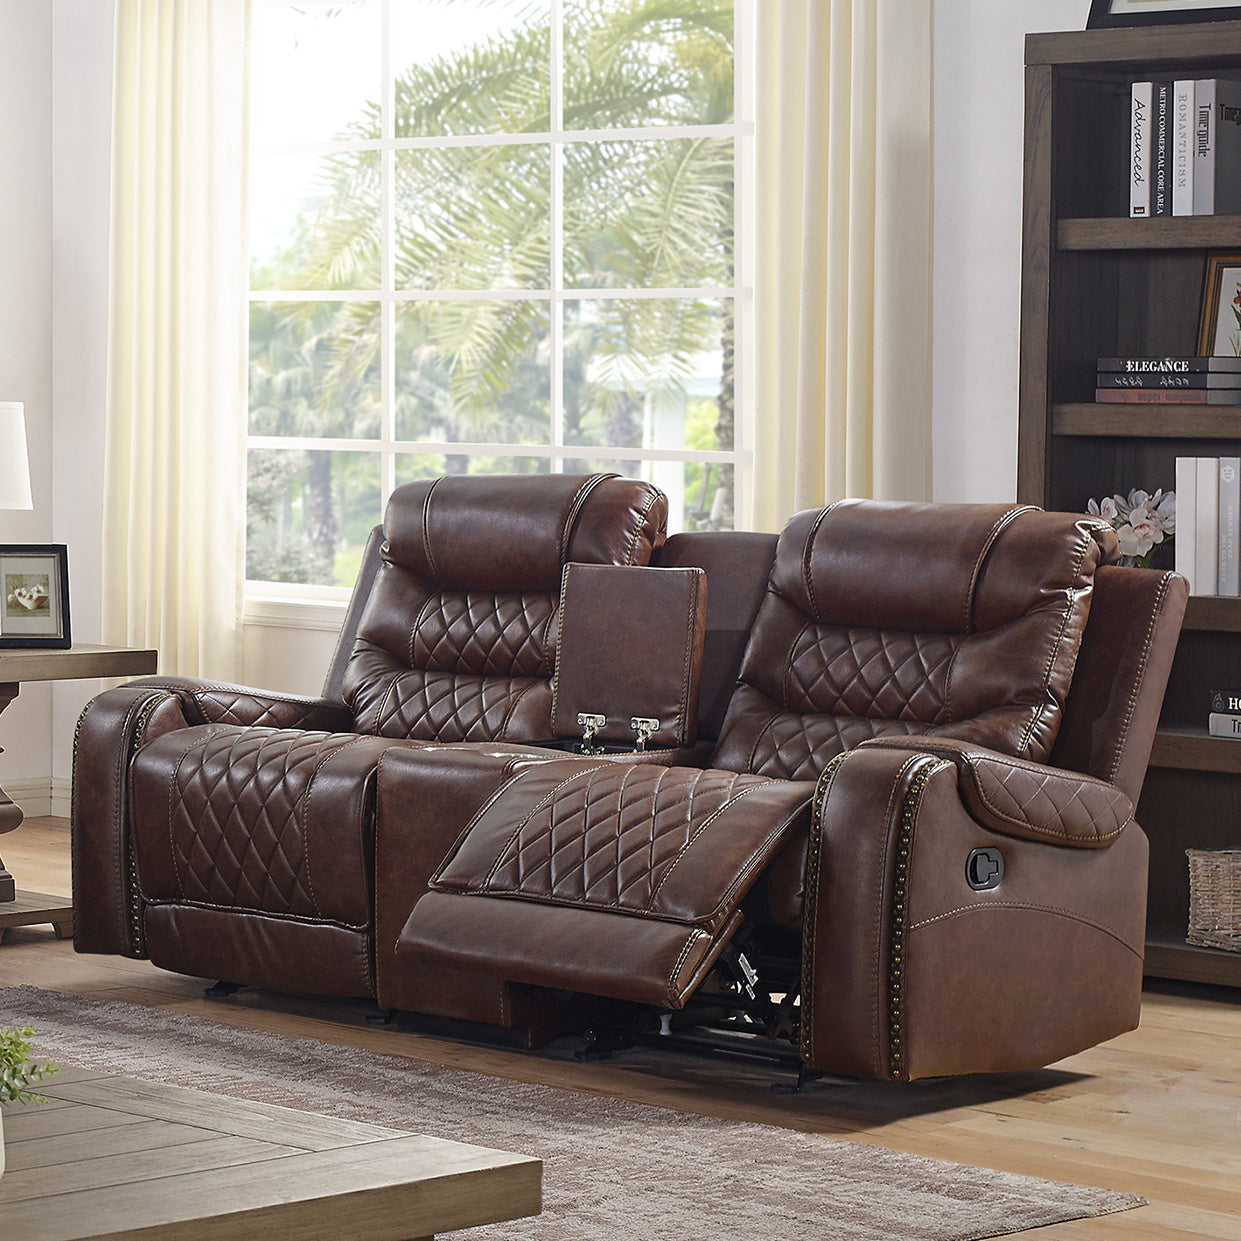 Klens Faux Leather Reclining Loveseat with Nailhead Trim, Brown